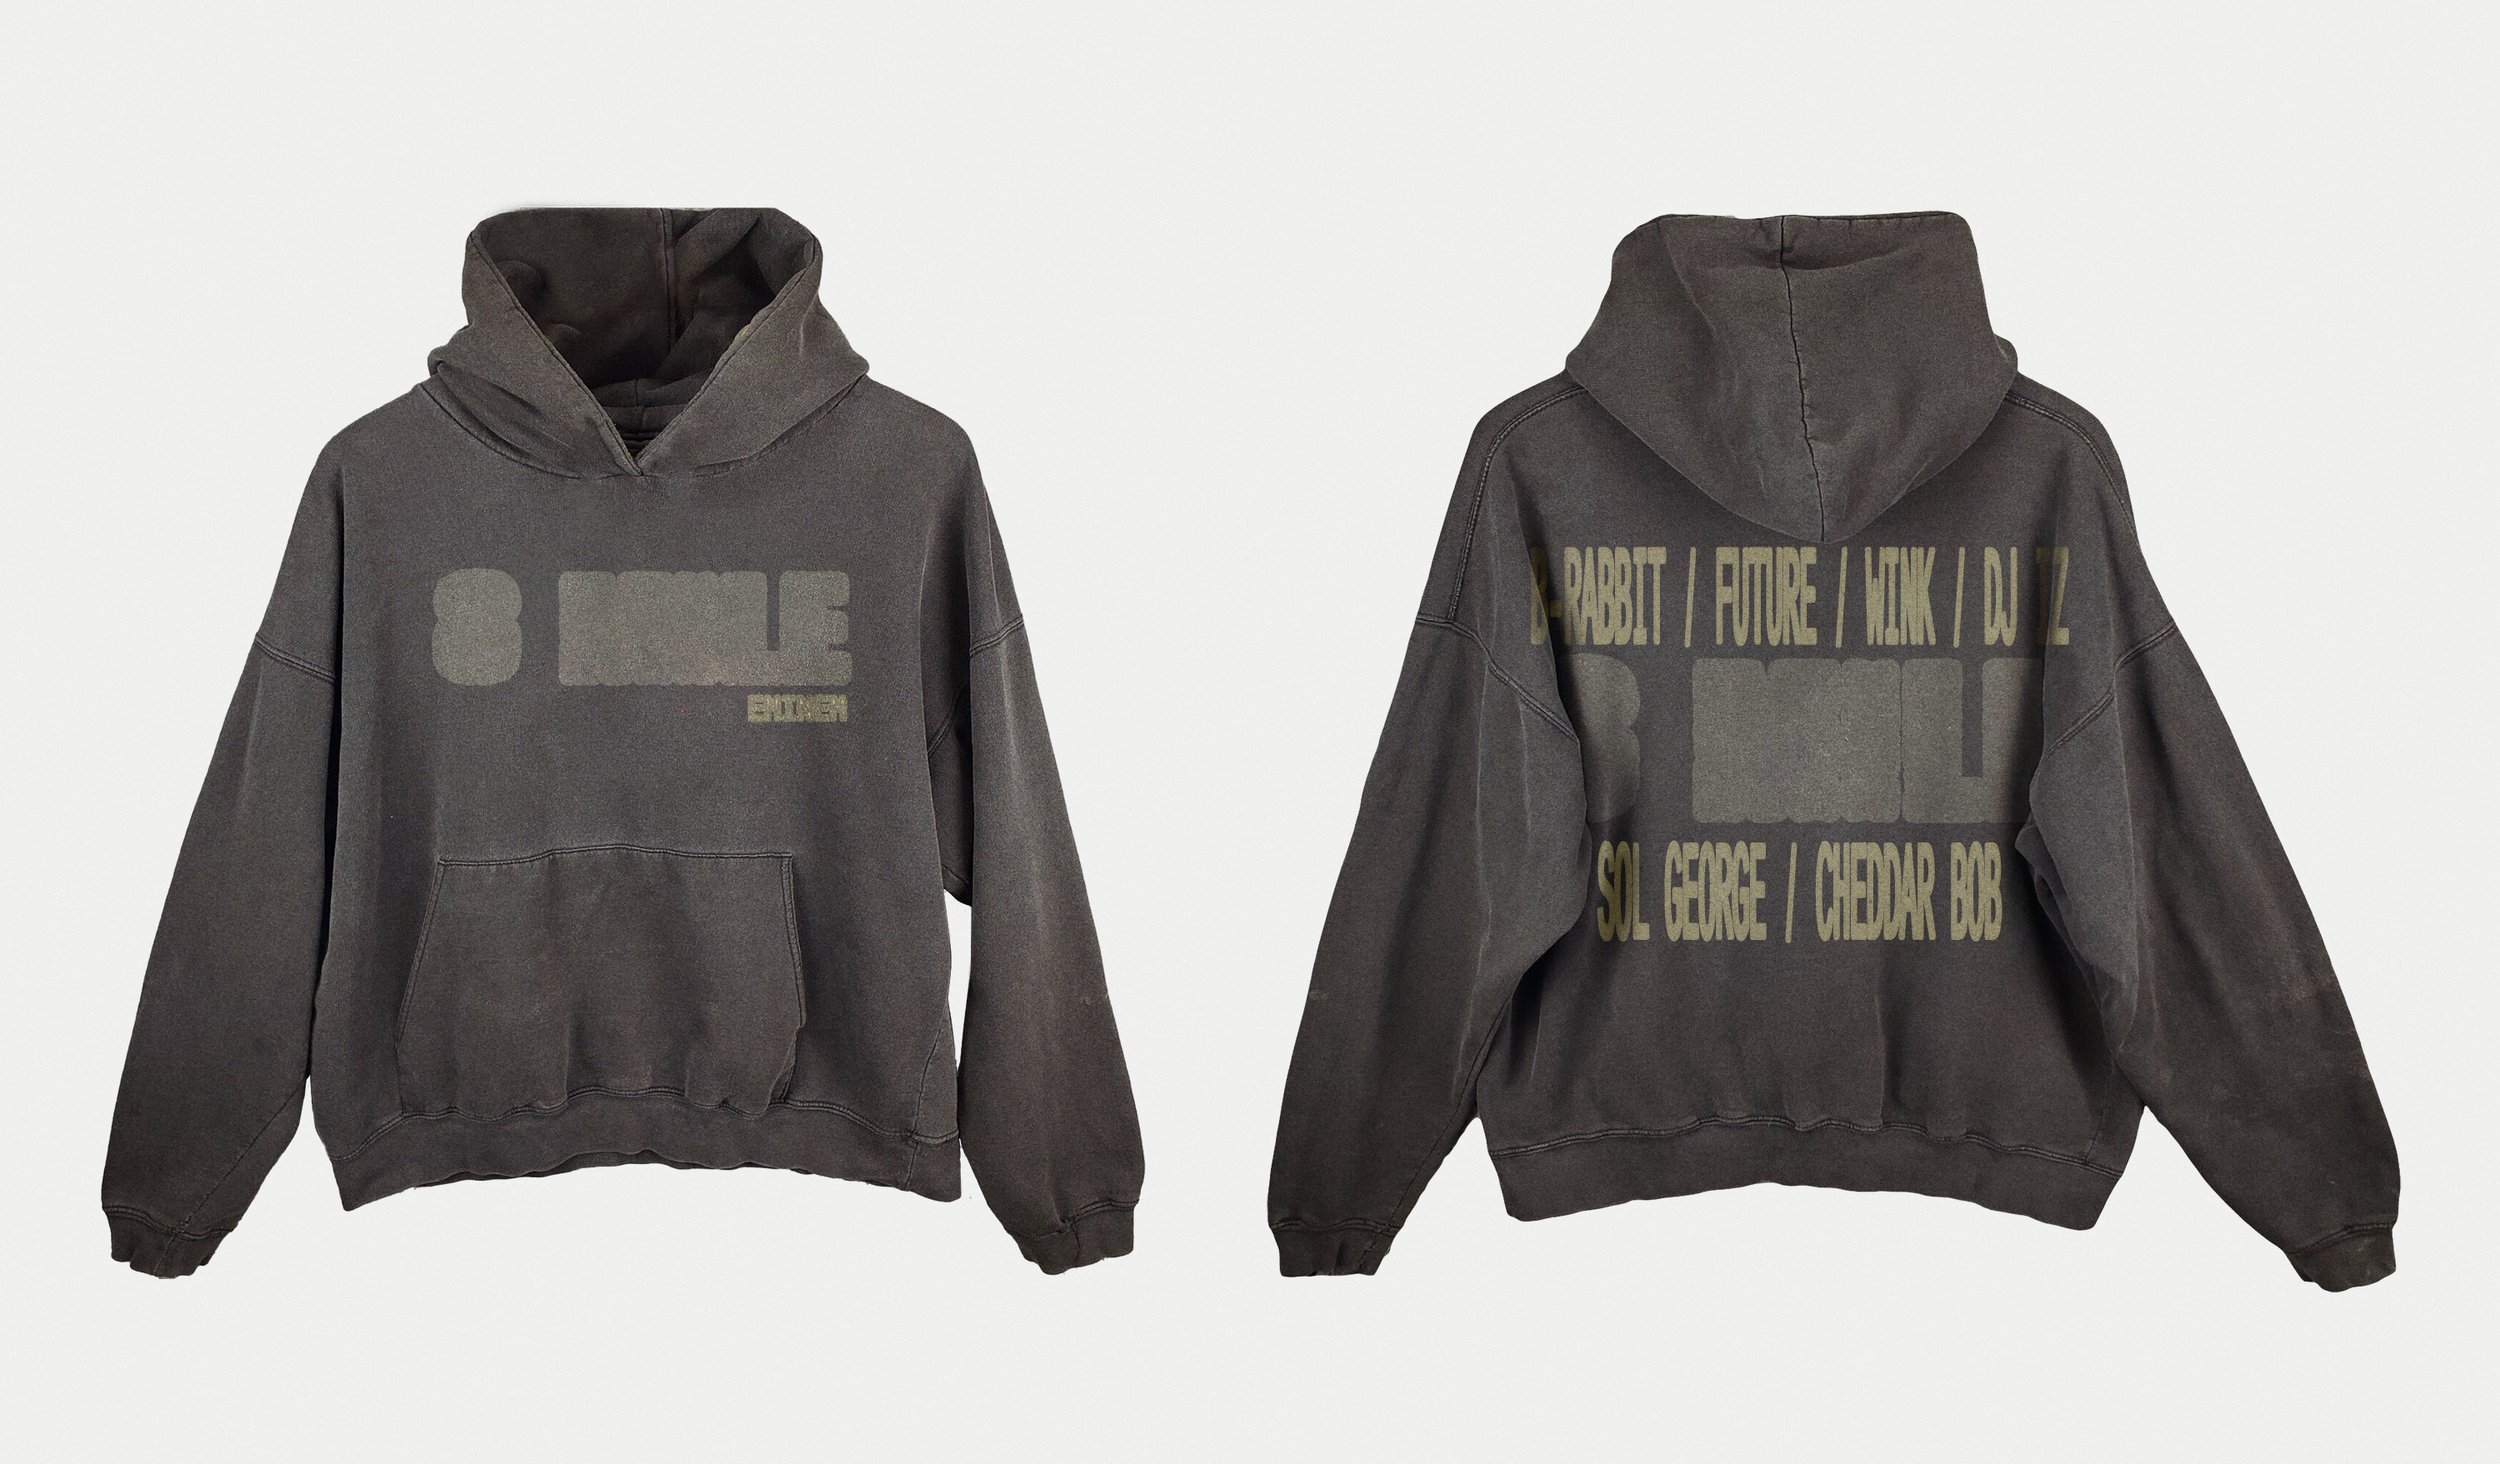  8 Mile Anniversary Merch Capsule for Eminem  Design + Direction by Myself  